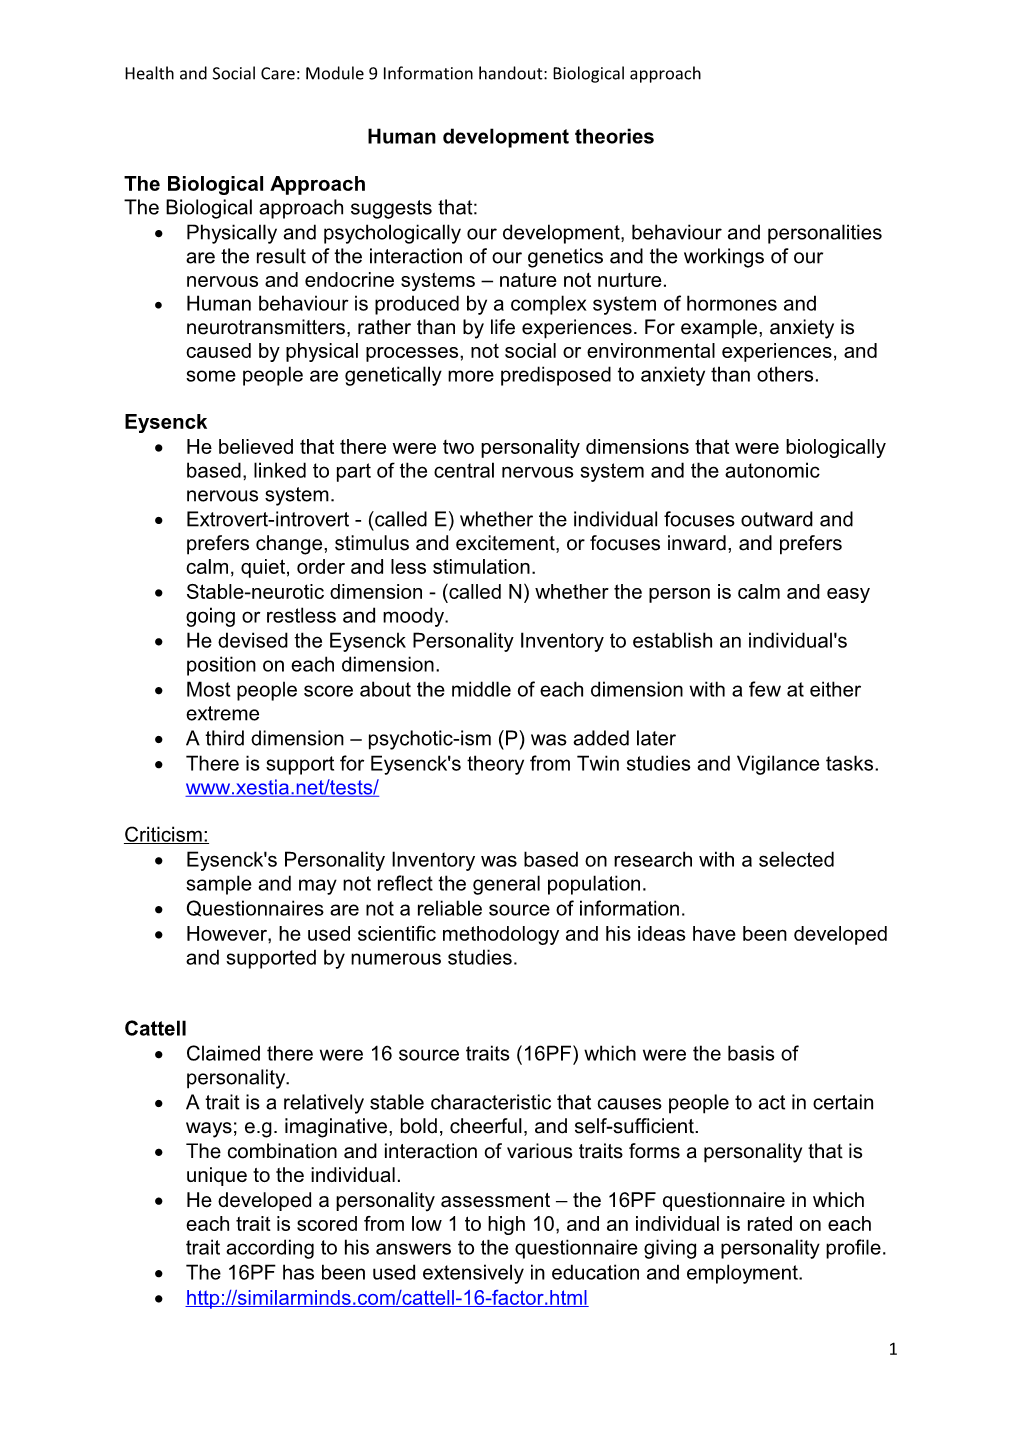 Health and Social Care: Module 9 Information Handout: Biological Approach